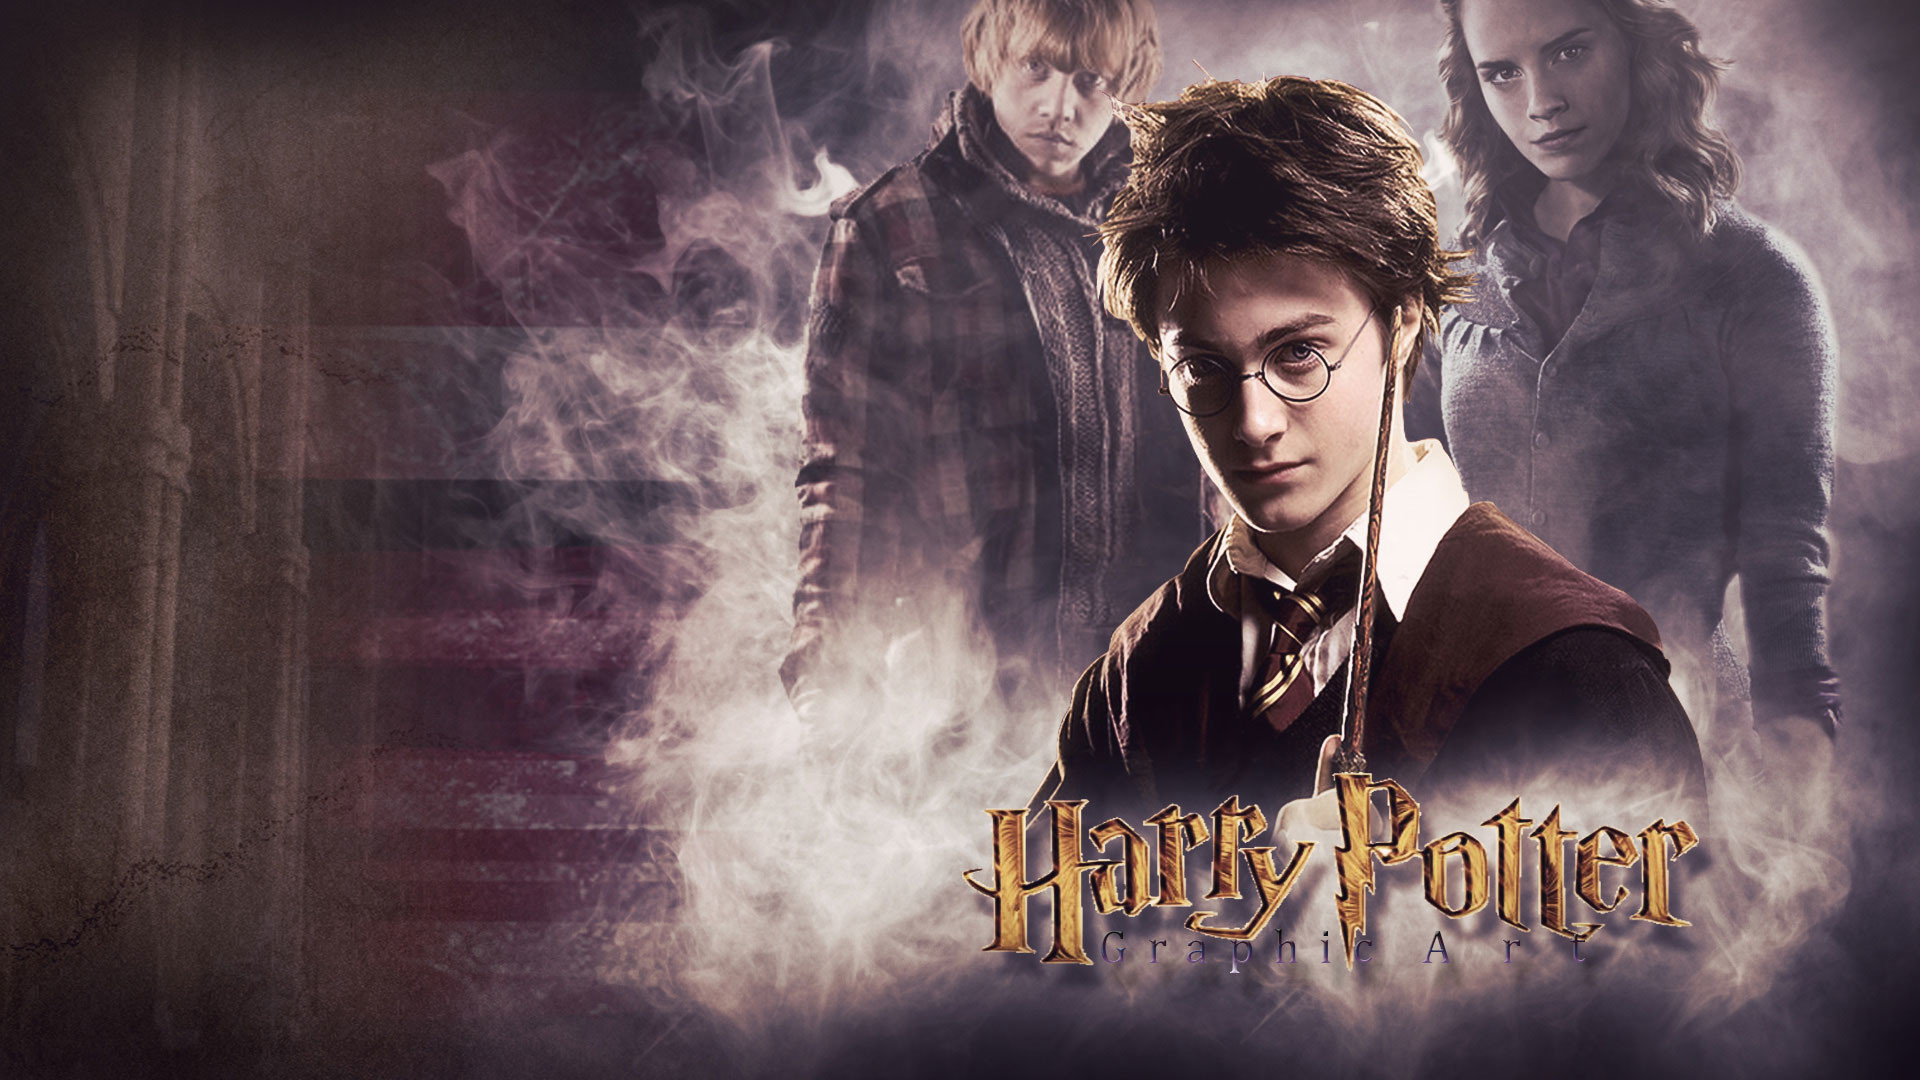 1920x1080 ... harry potter amazing hd wallpapers high resolution all hd ...